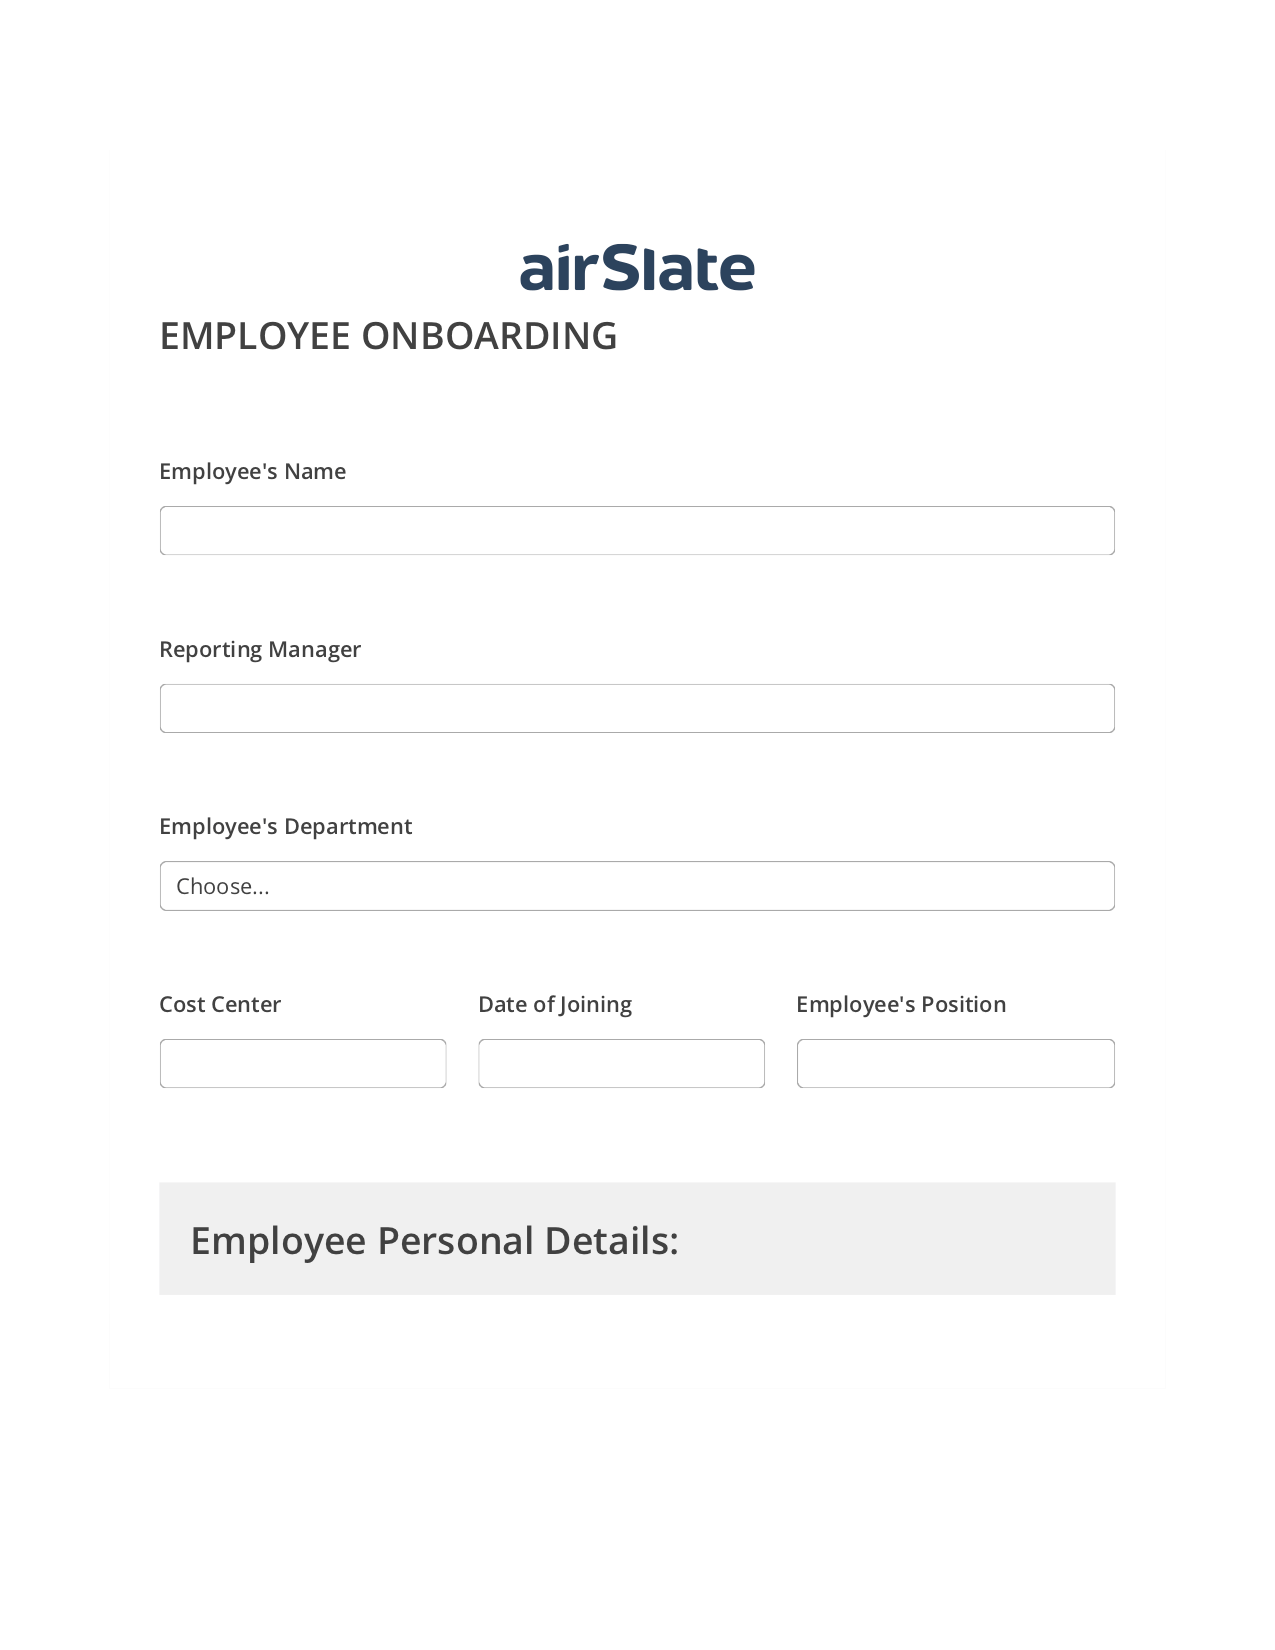 Employee Onboarding Workflow Pre-fill Slate from MS Dynamics 365 record, Lock the Slate Bot, Export to NetSuite Bot